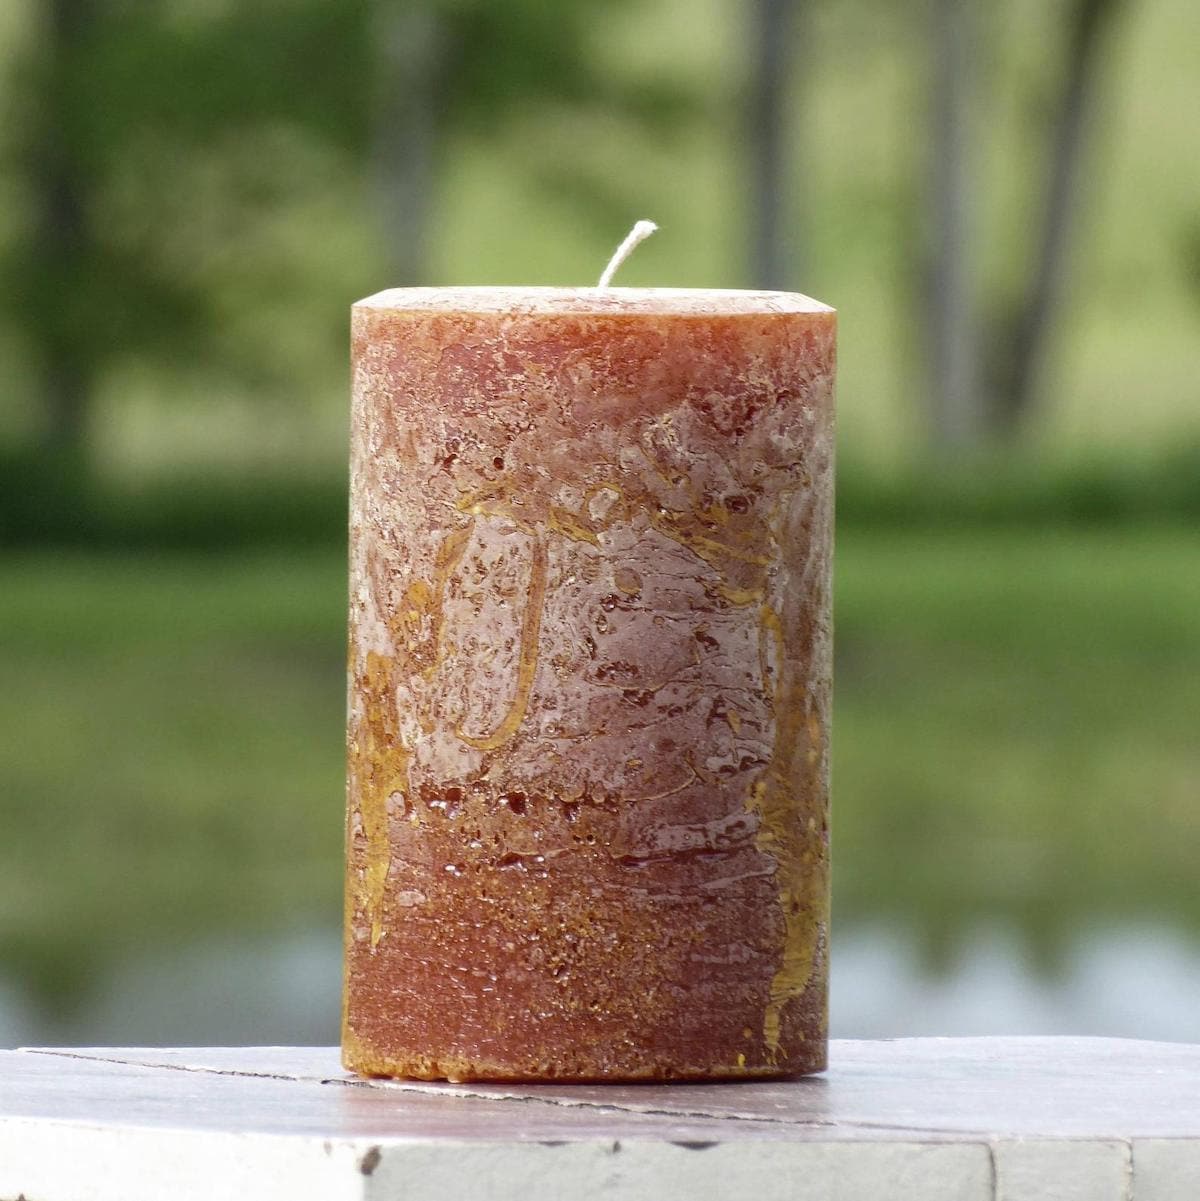 Rusty Orange unscented pillar candle from Still Water Candles on Etsy